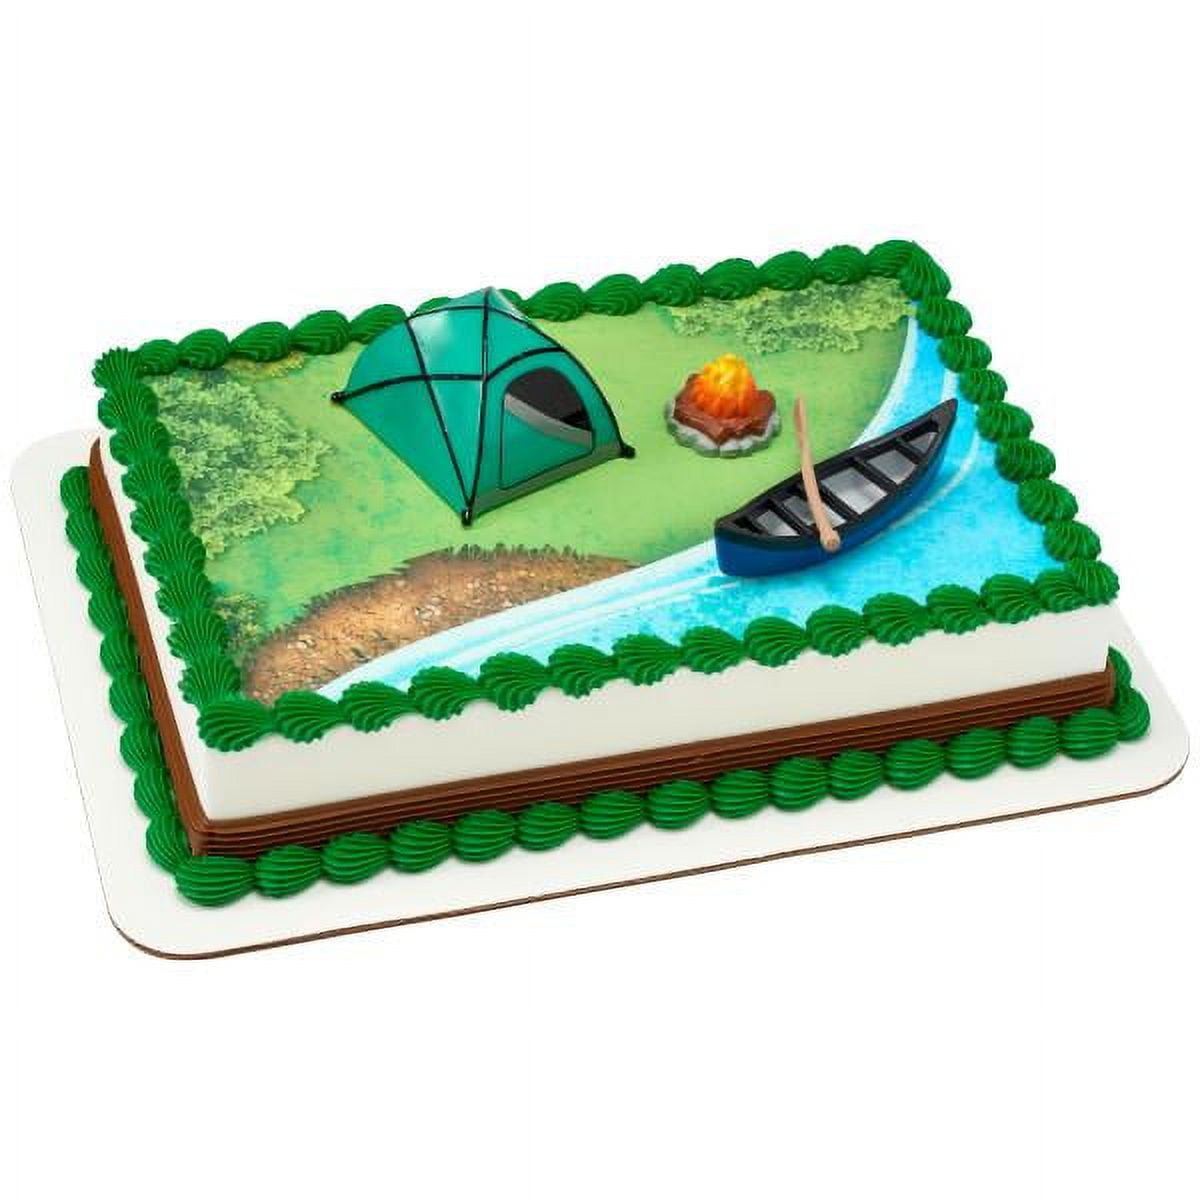 Fireside Camp DecoSet with 1/4 sheet Edible Cake Topper Image